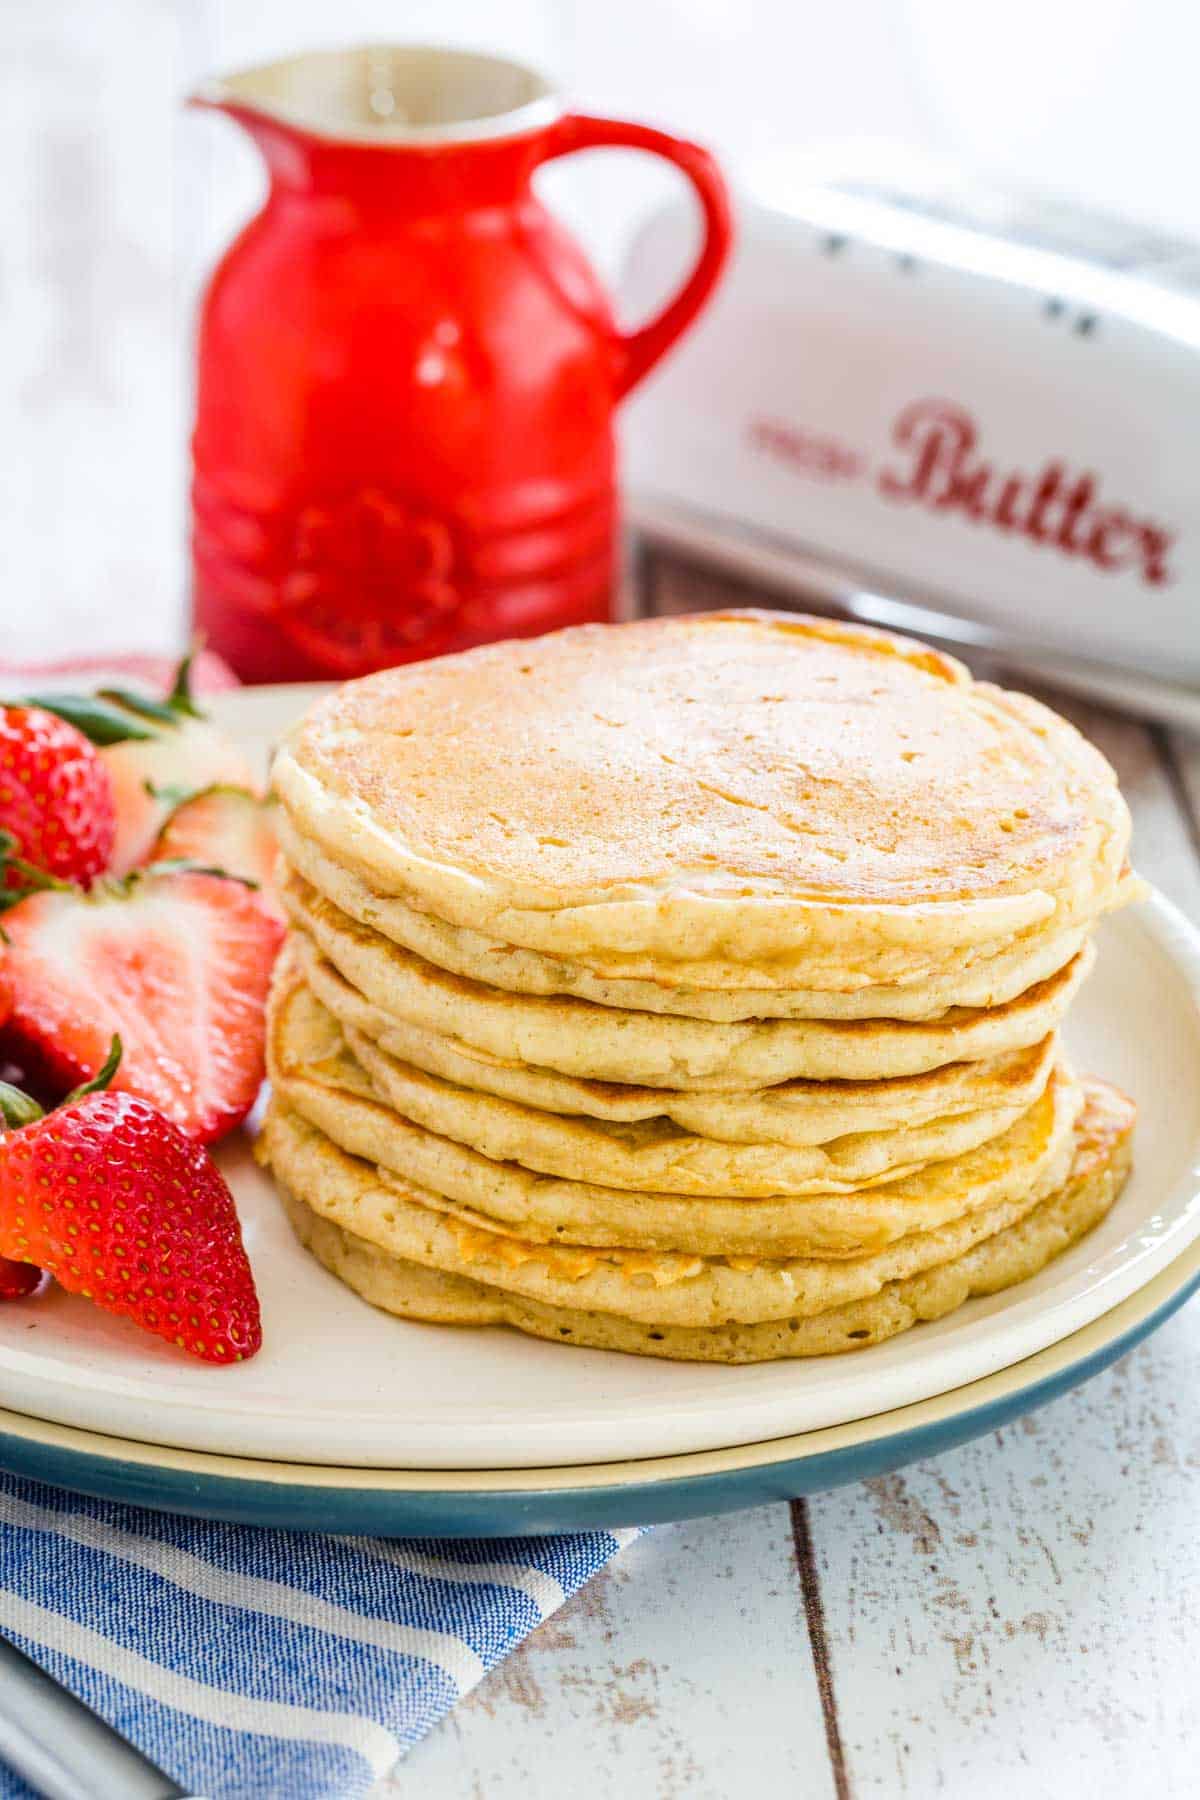 A stack of gluten free buttermilk pancakes on a plate next to sliced strawberries and a jug of maple syrup.